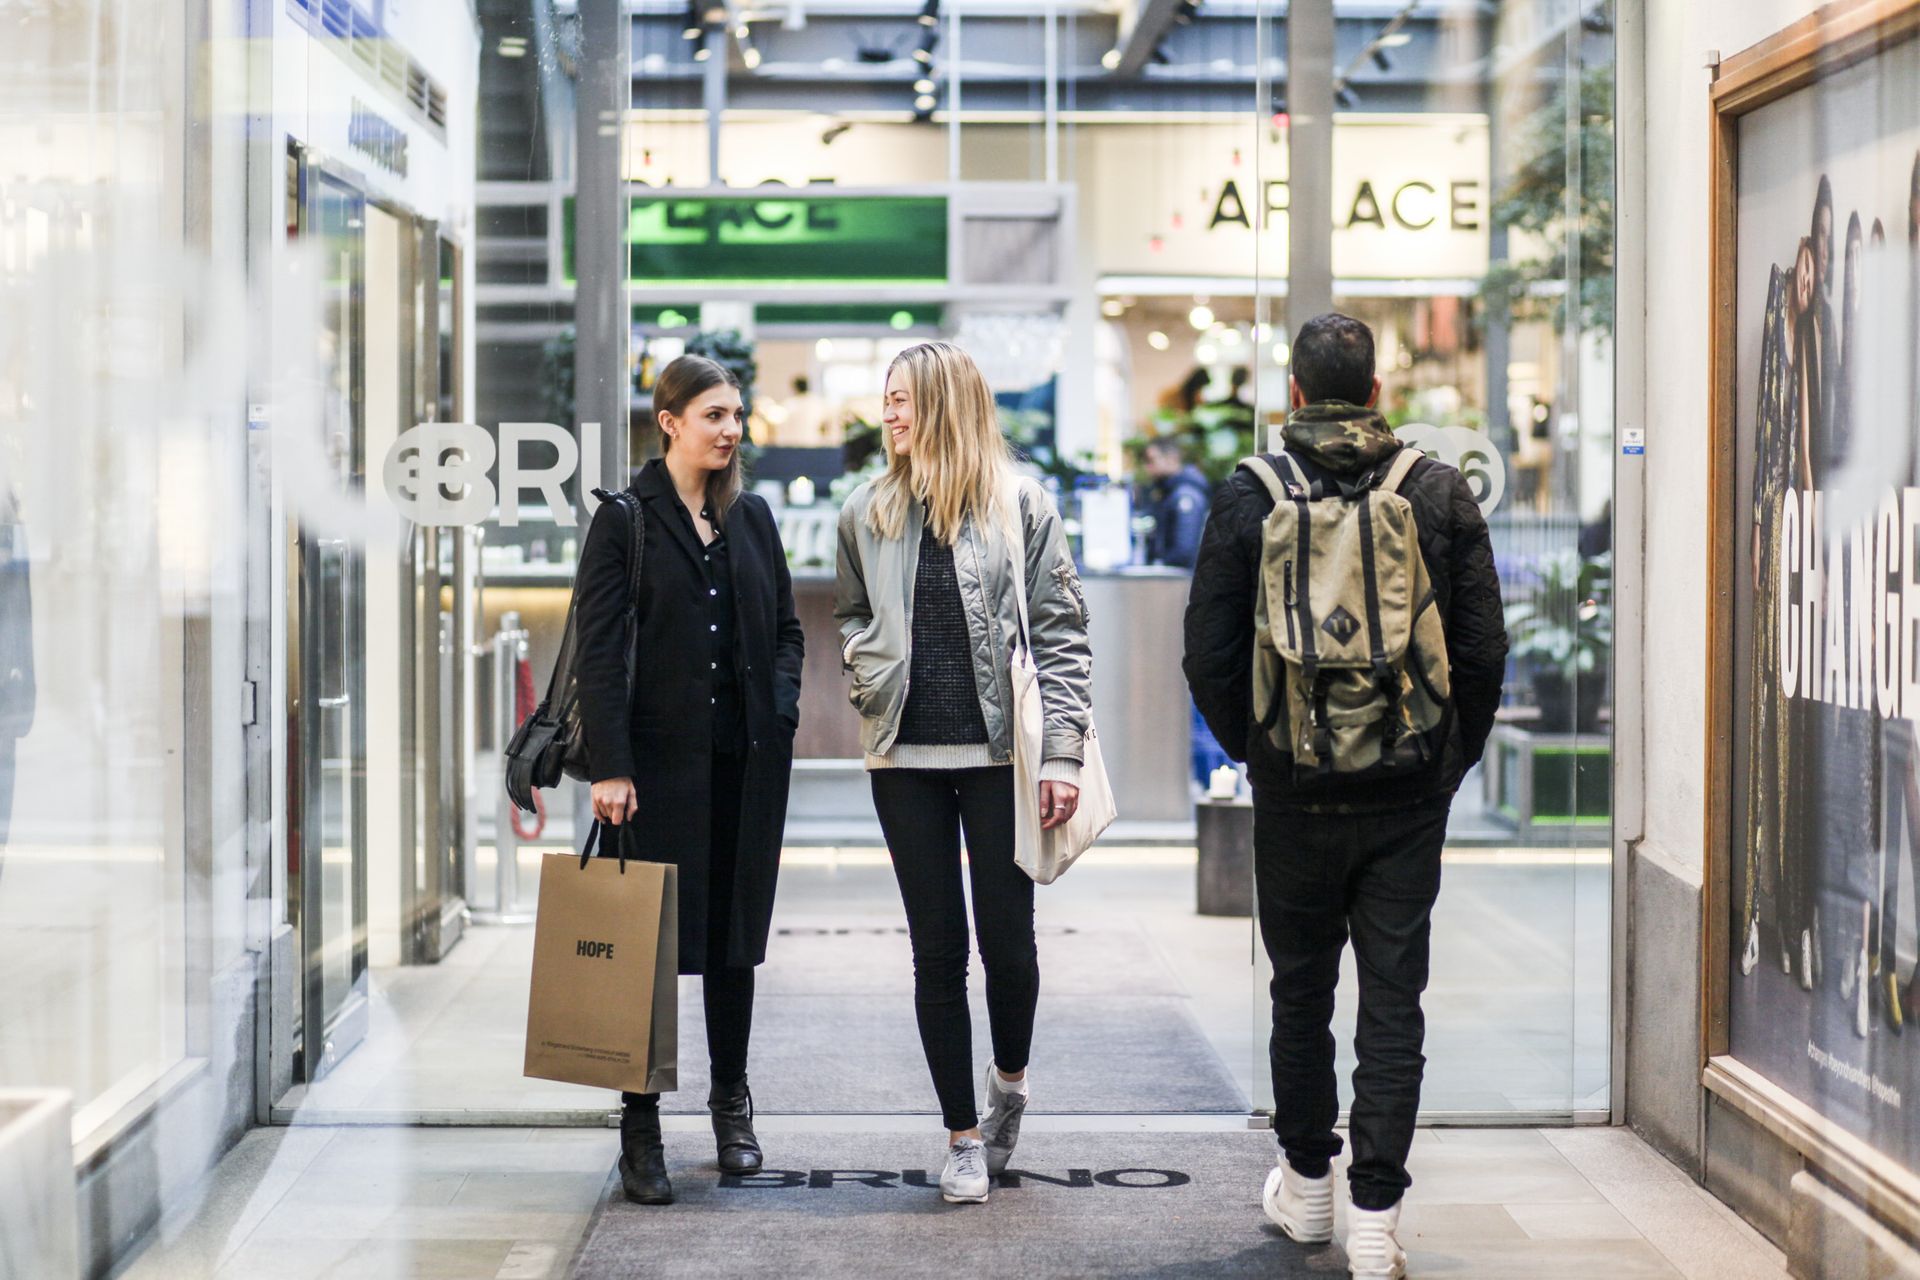 A man with a backpack exits a store in Stockholm as two women enter it.